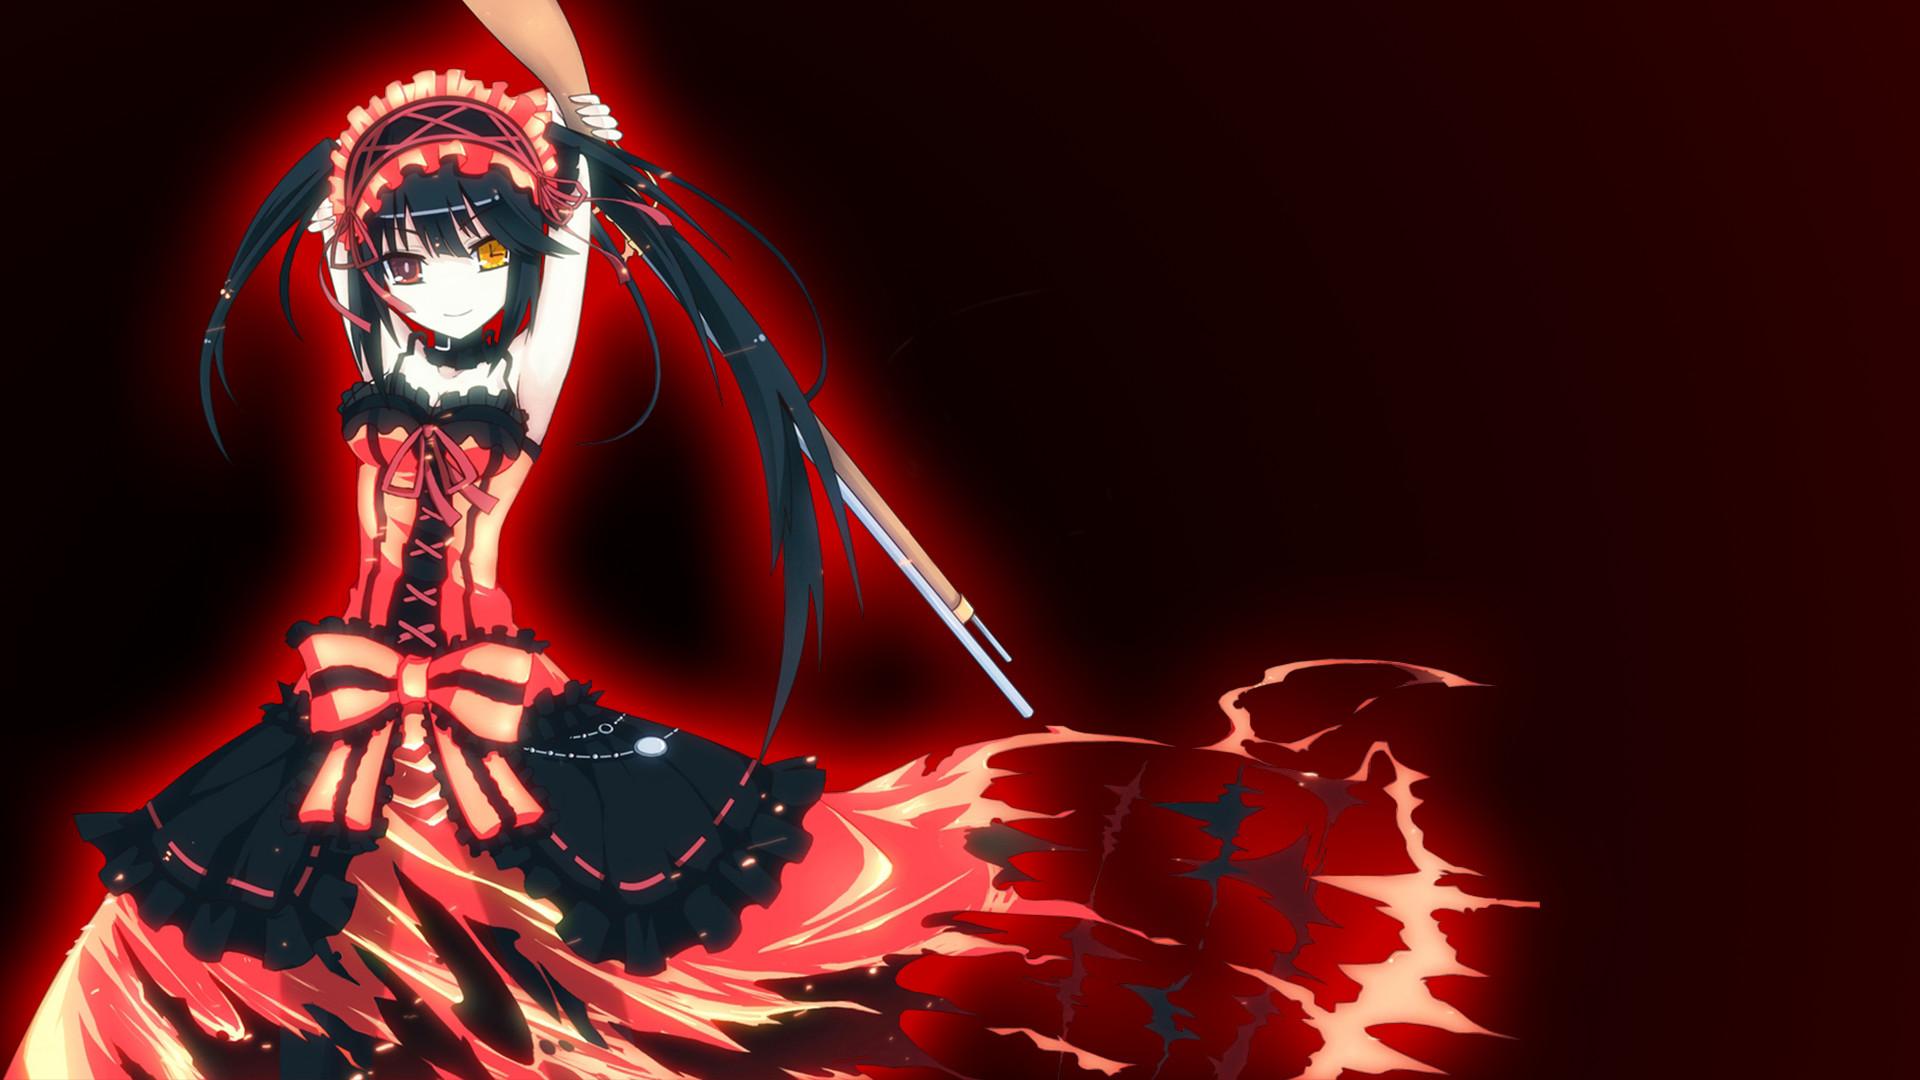 Red and Black Anime Girl Wallpaper Free Red and Black Anime Girl Background